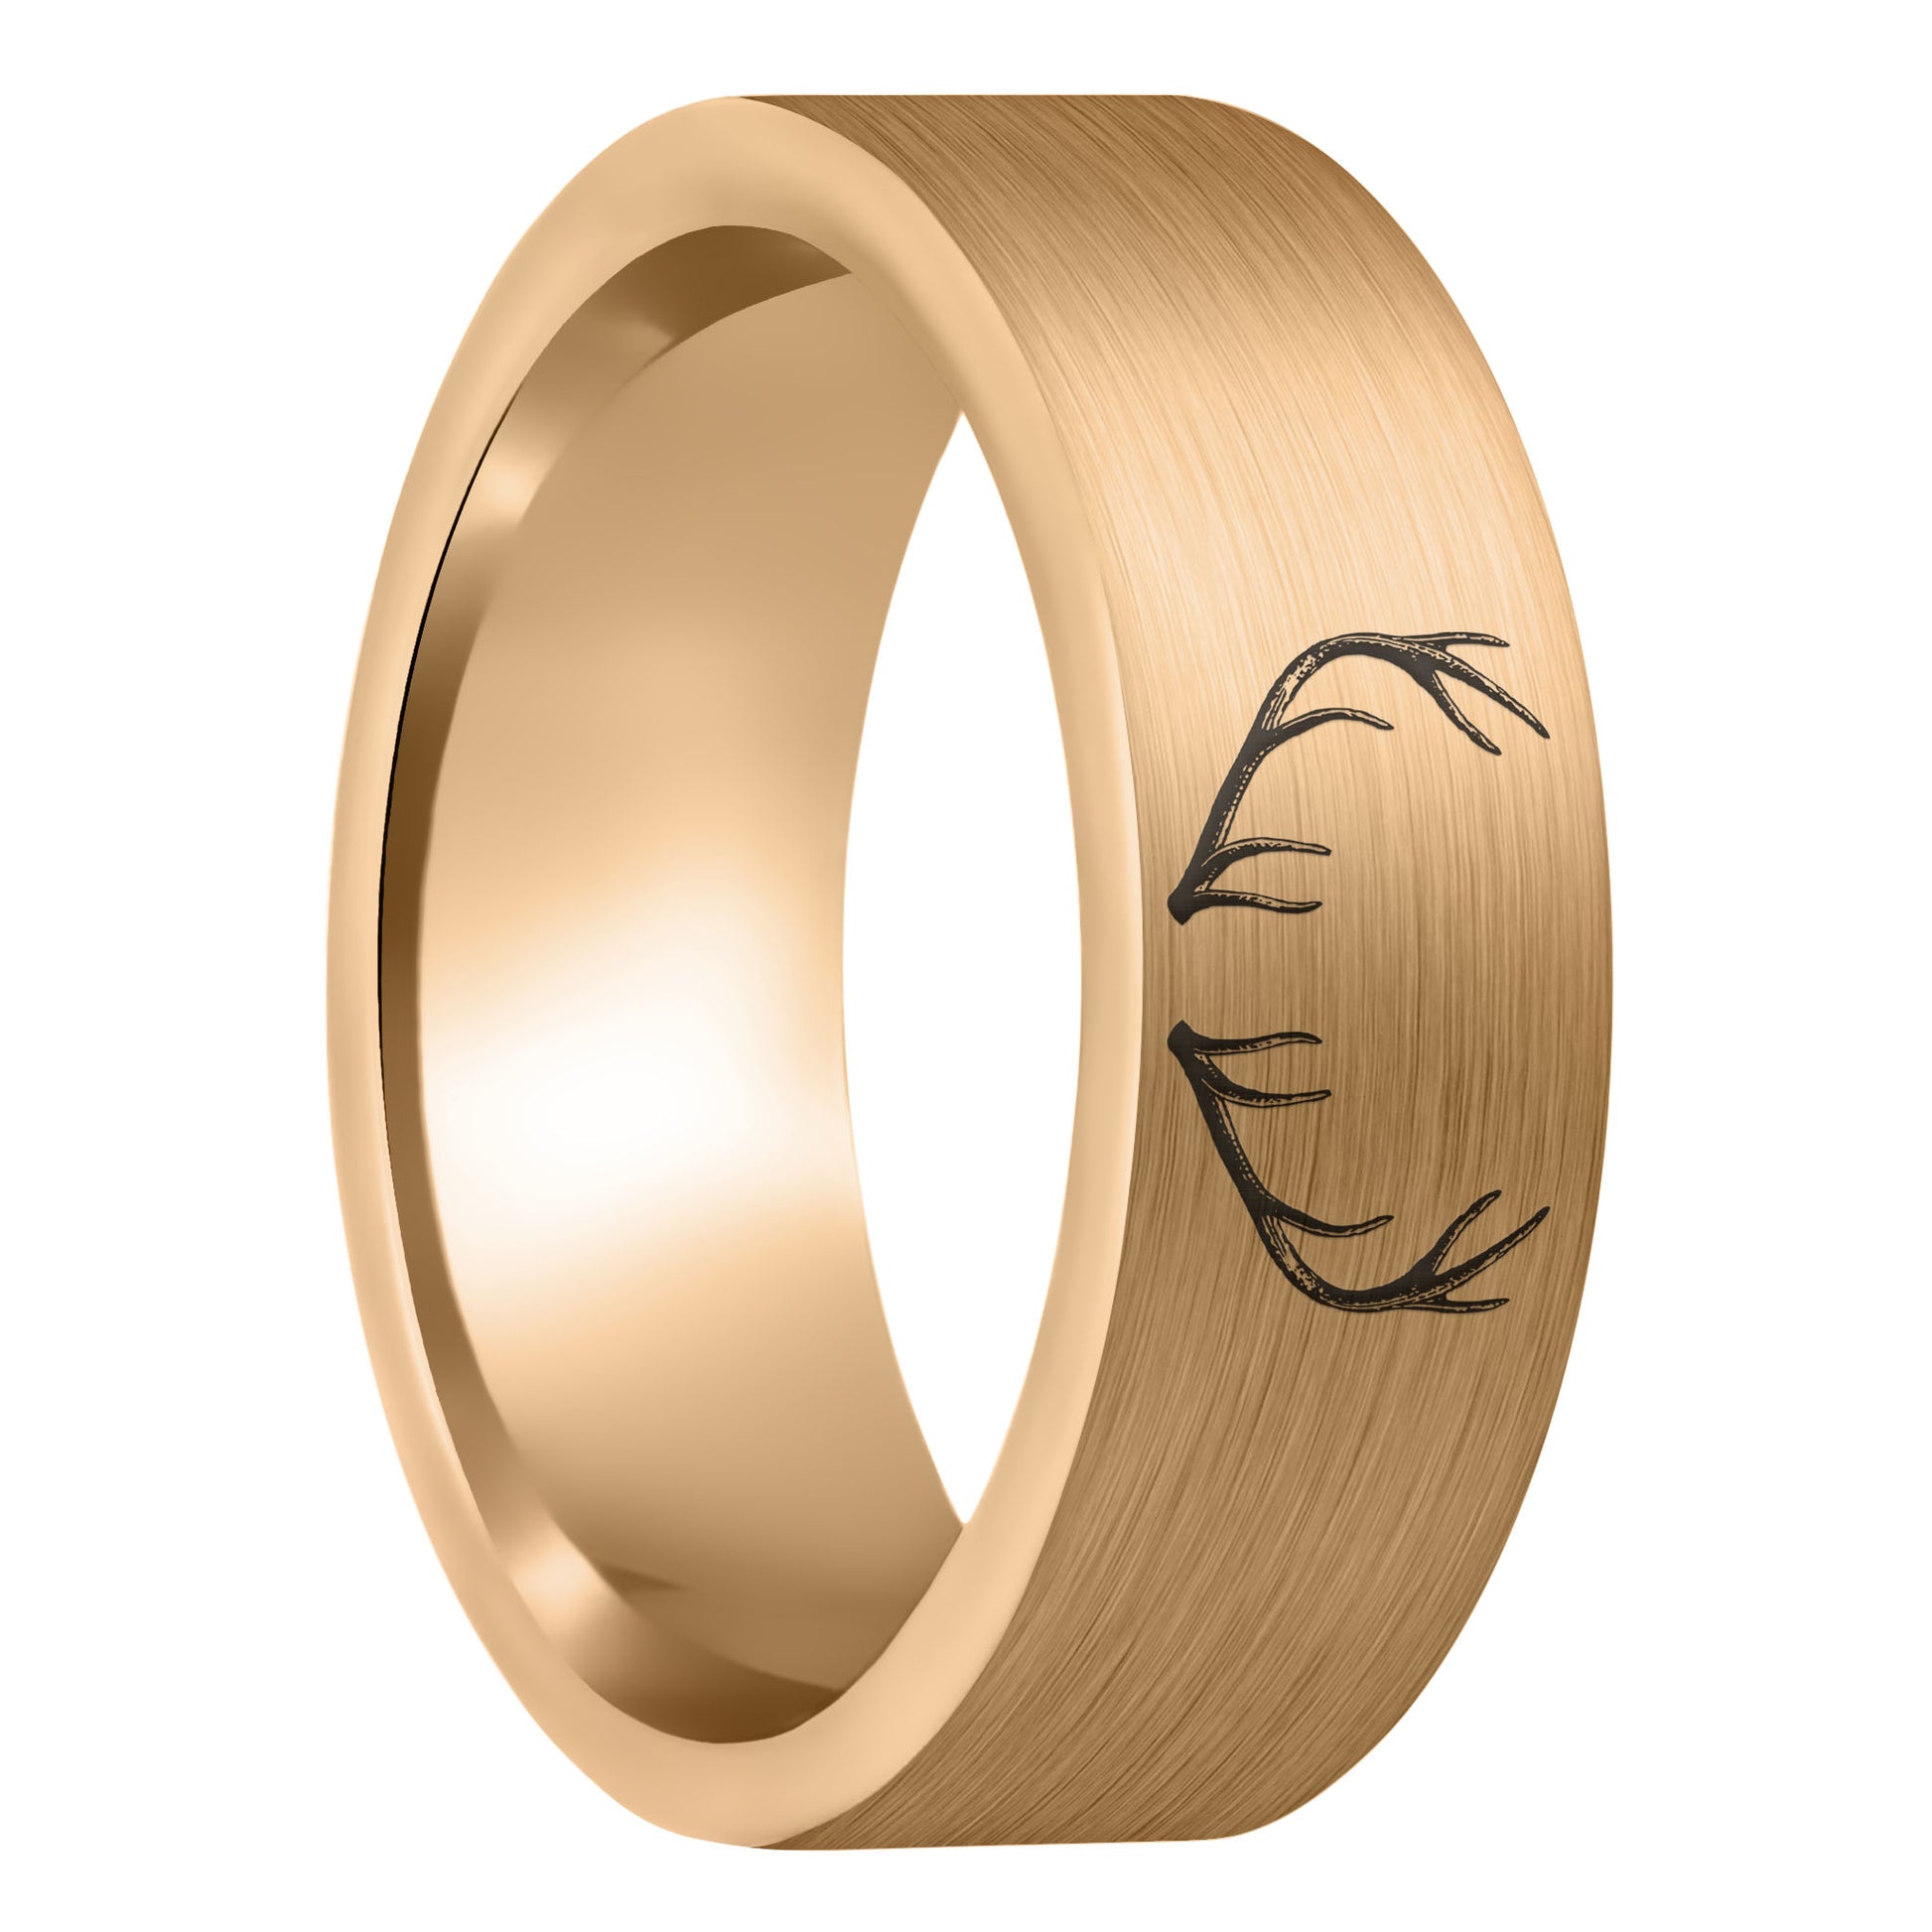 A antler engraved brushed rose gold tungsten men's wedding band displayed on a plain white background.